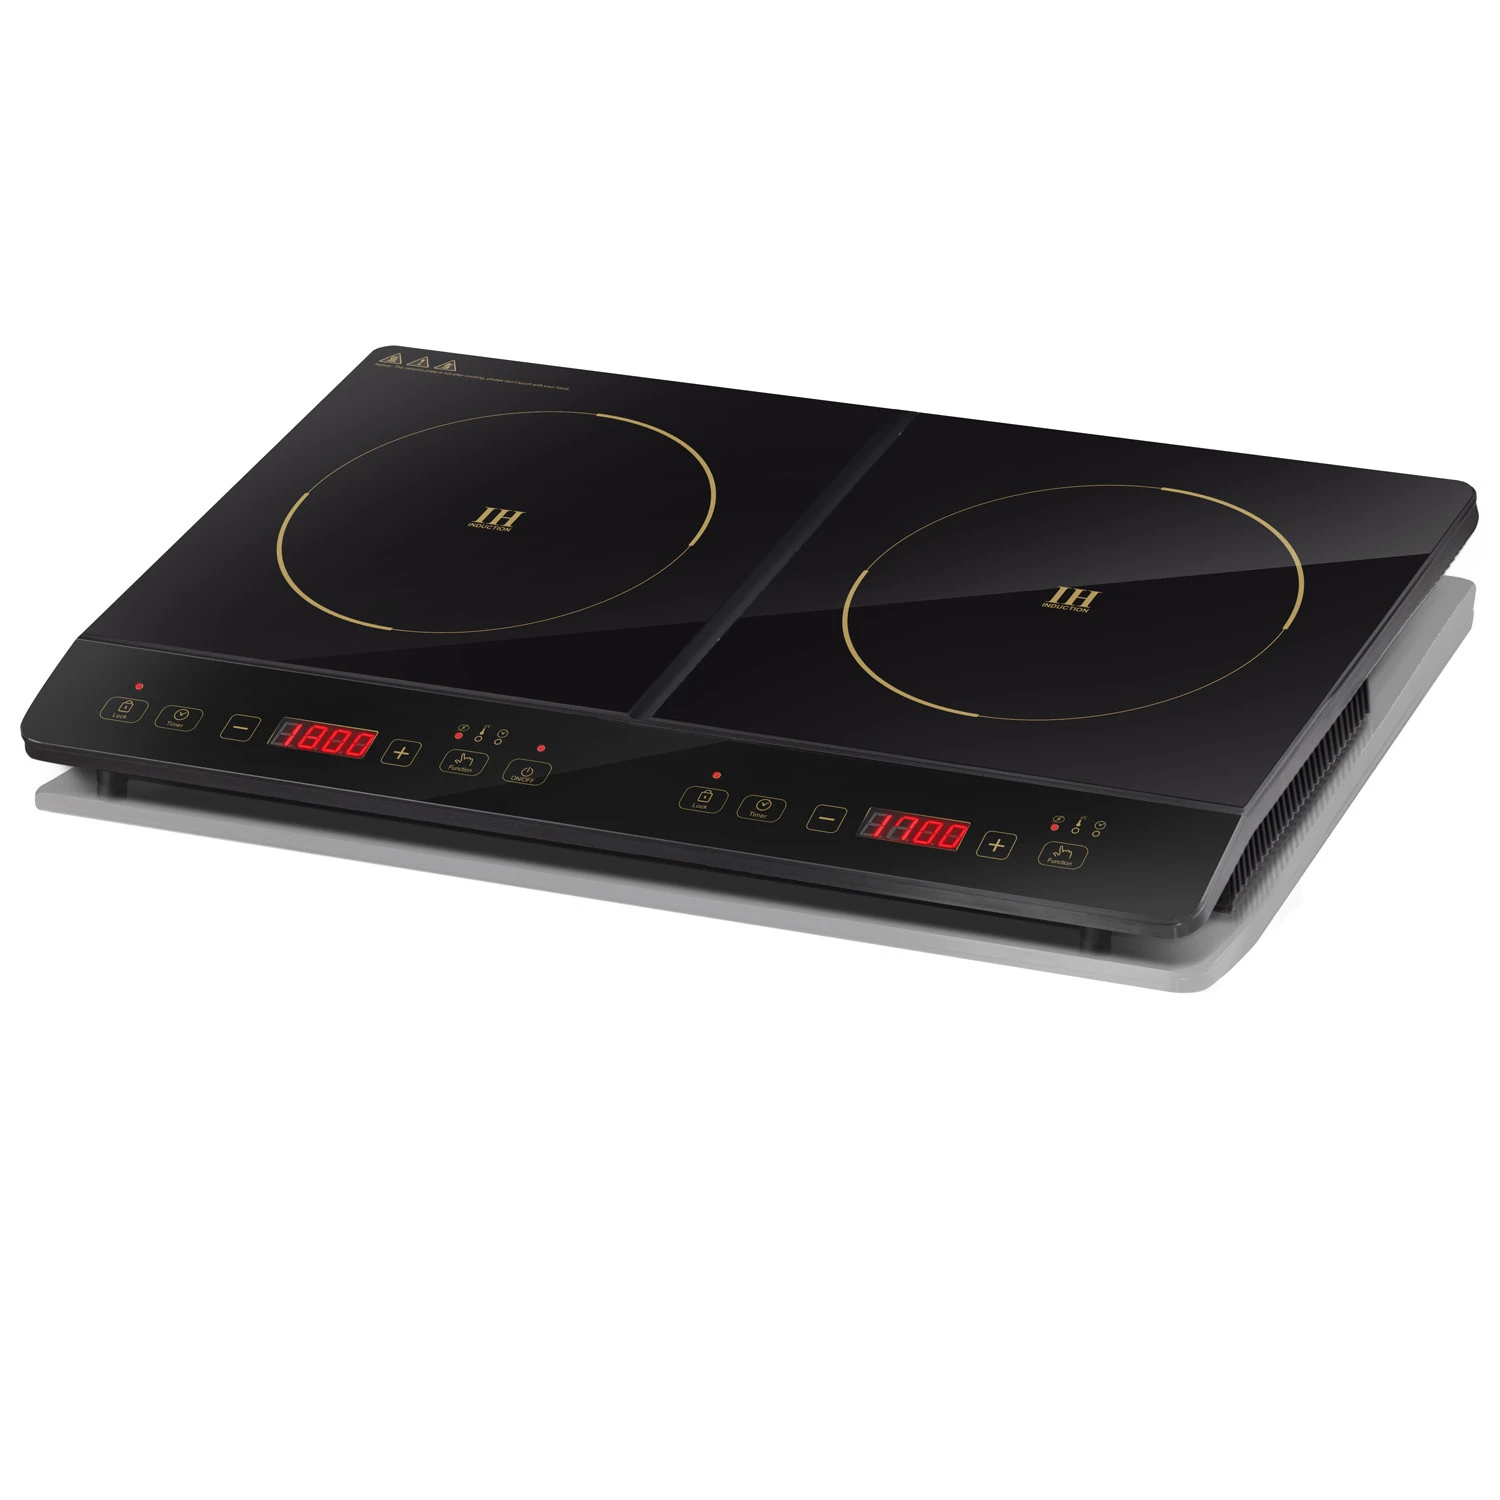 3000W Kitchen Appliance 2 buner Induction Cooker electric induction cooker with Chinese glass